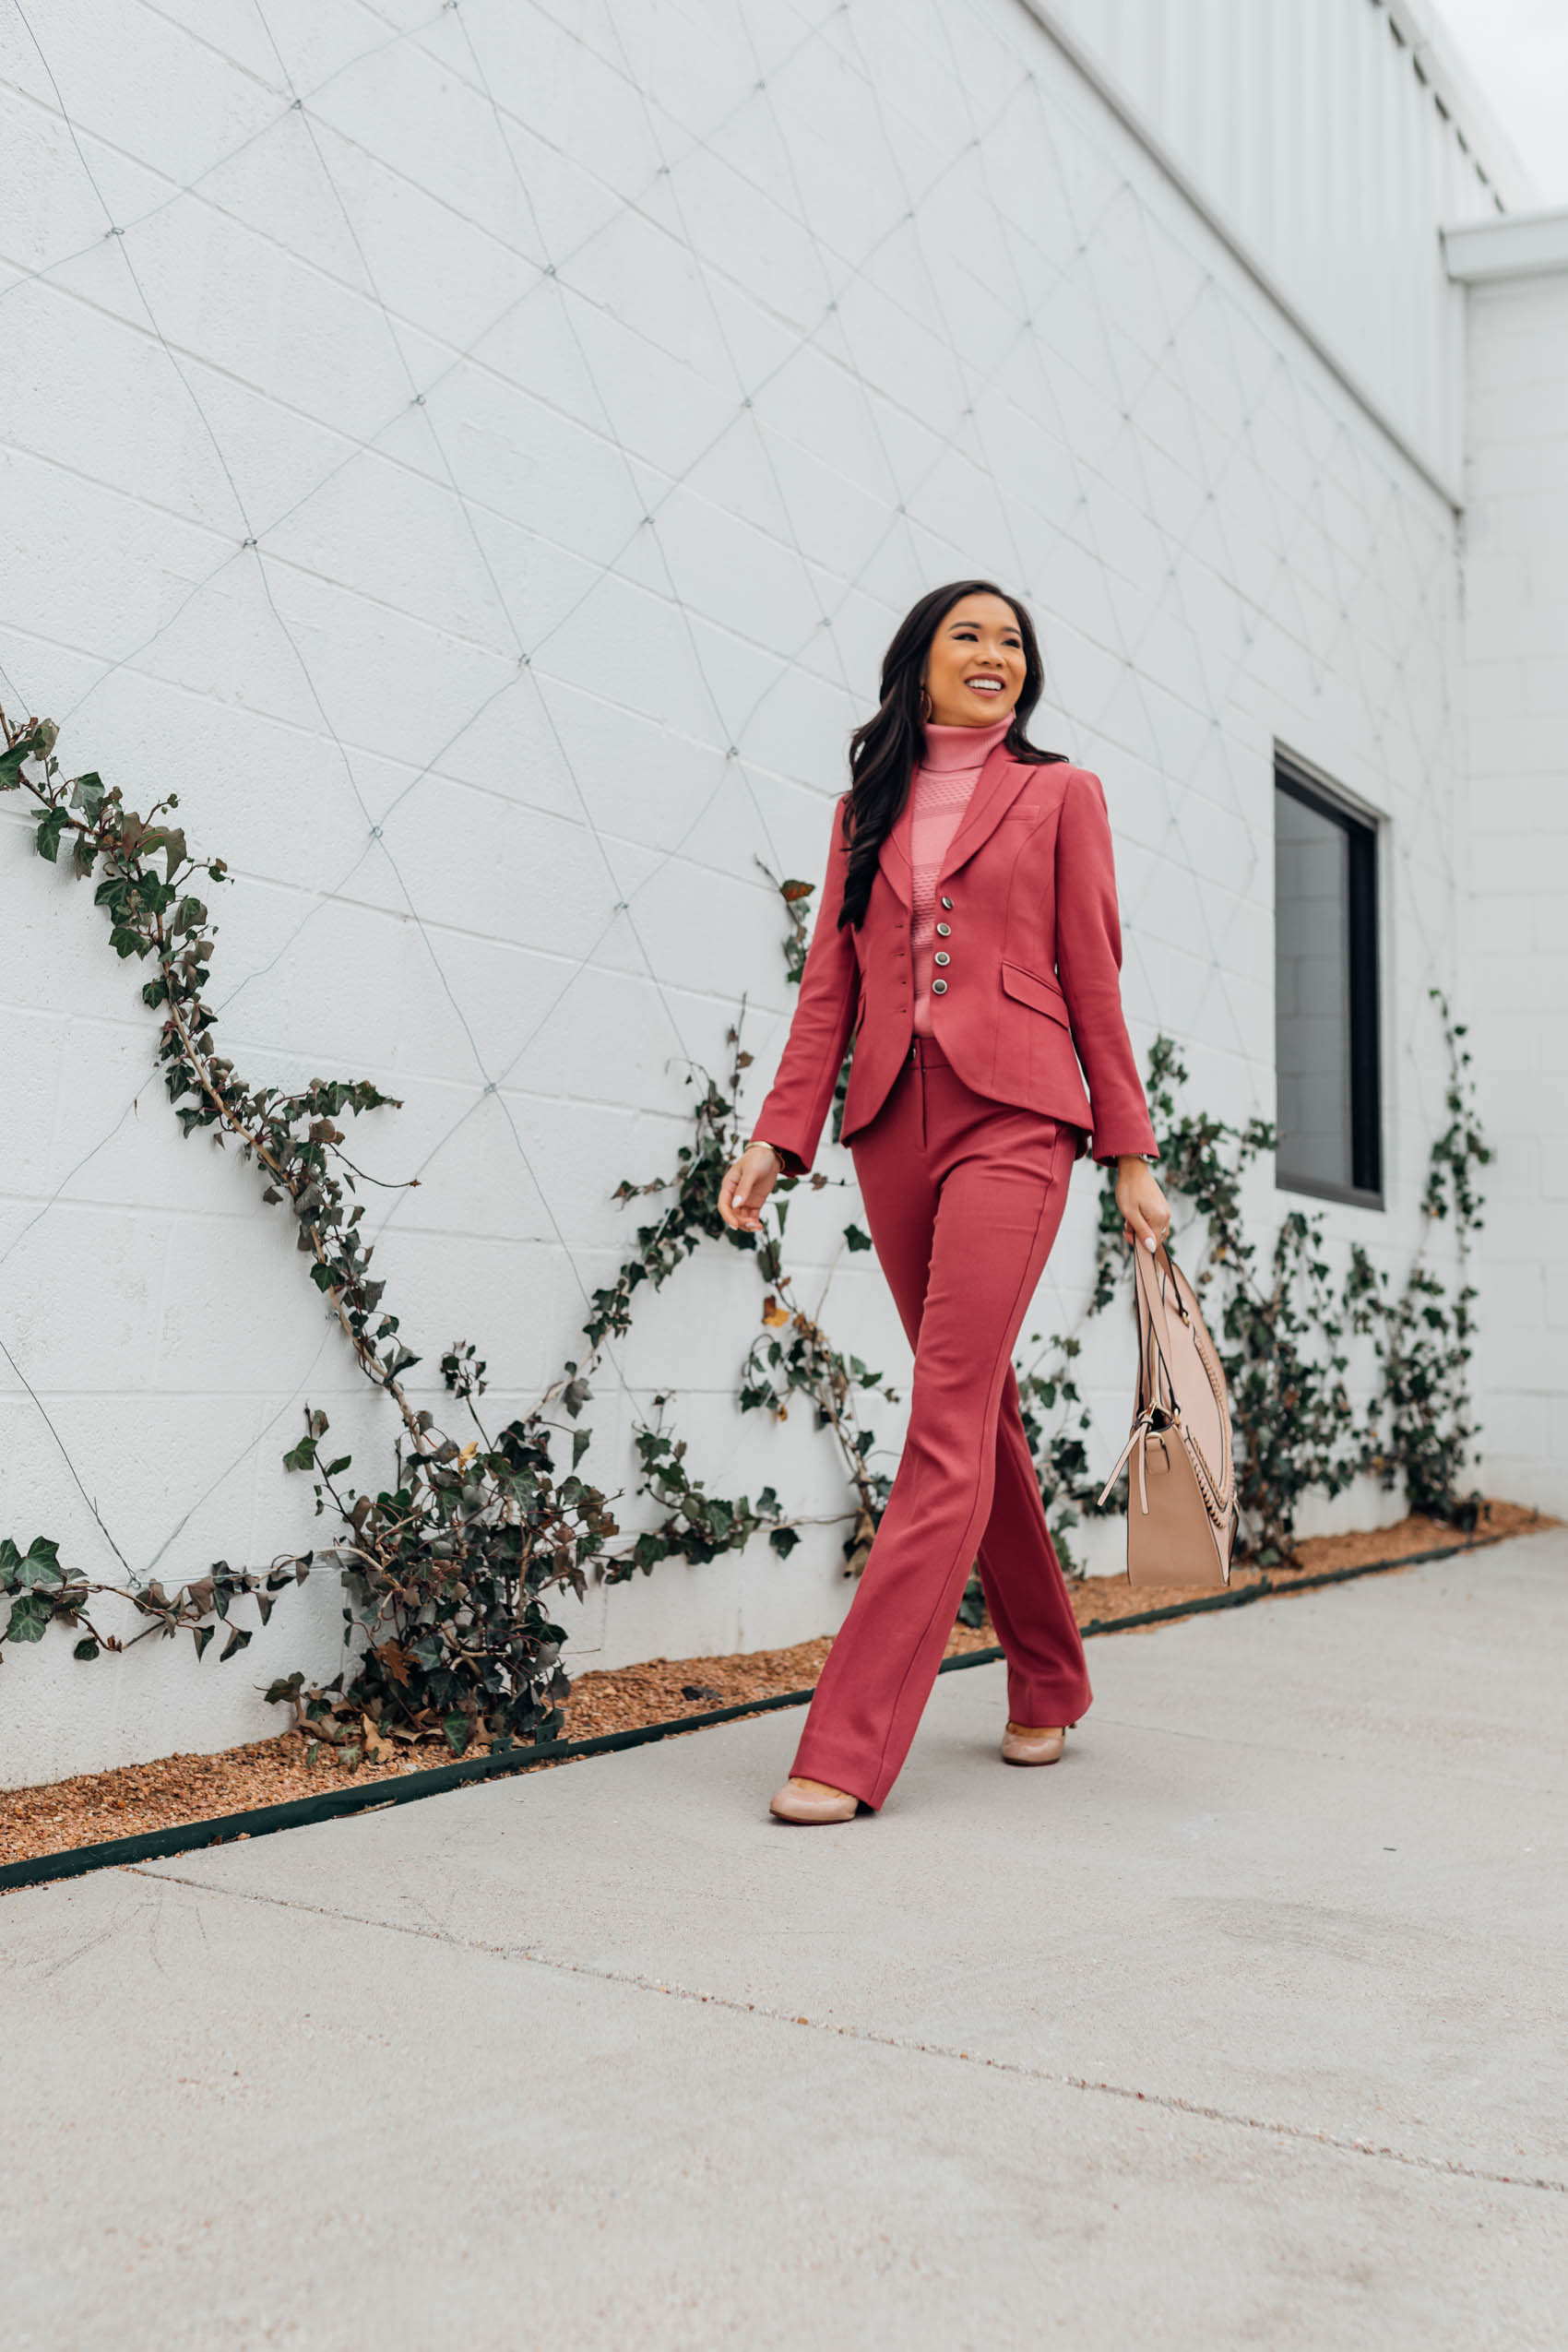 Blogger Hoang-Kim shares a colorful pant suit from White House Black Market